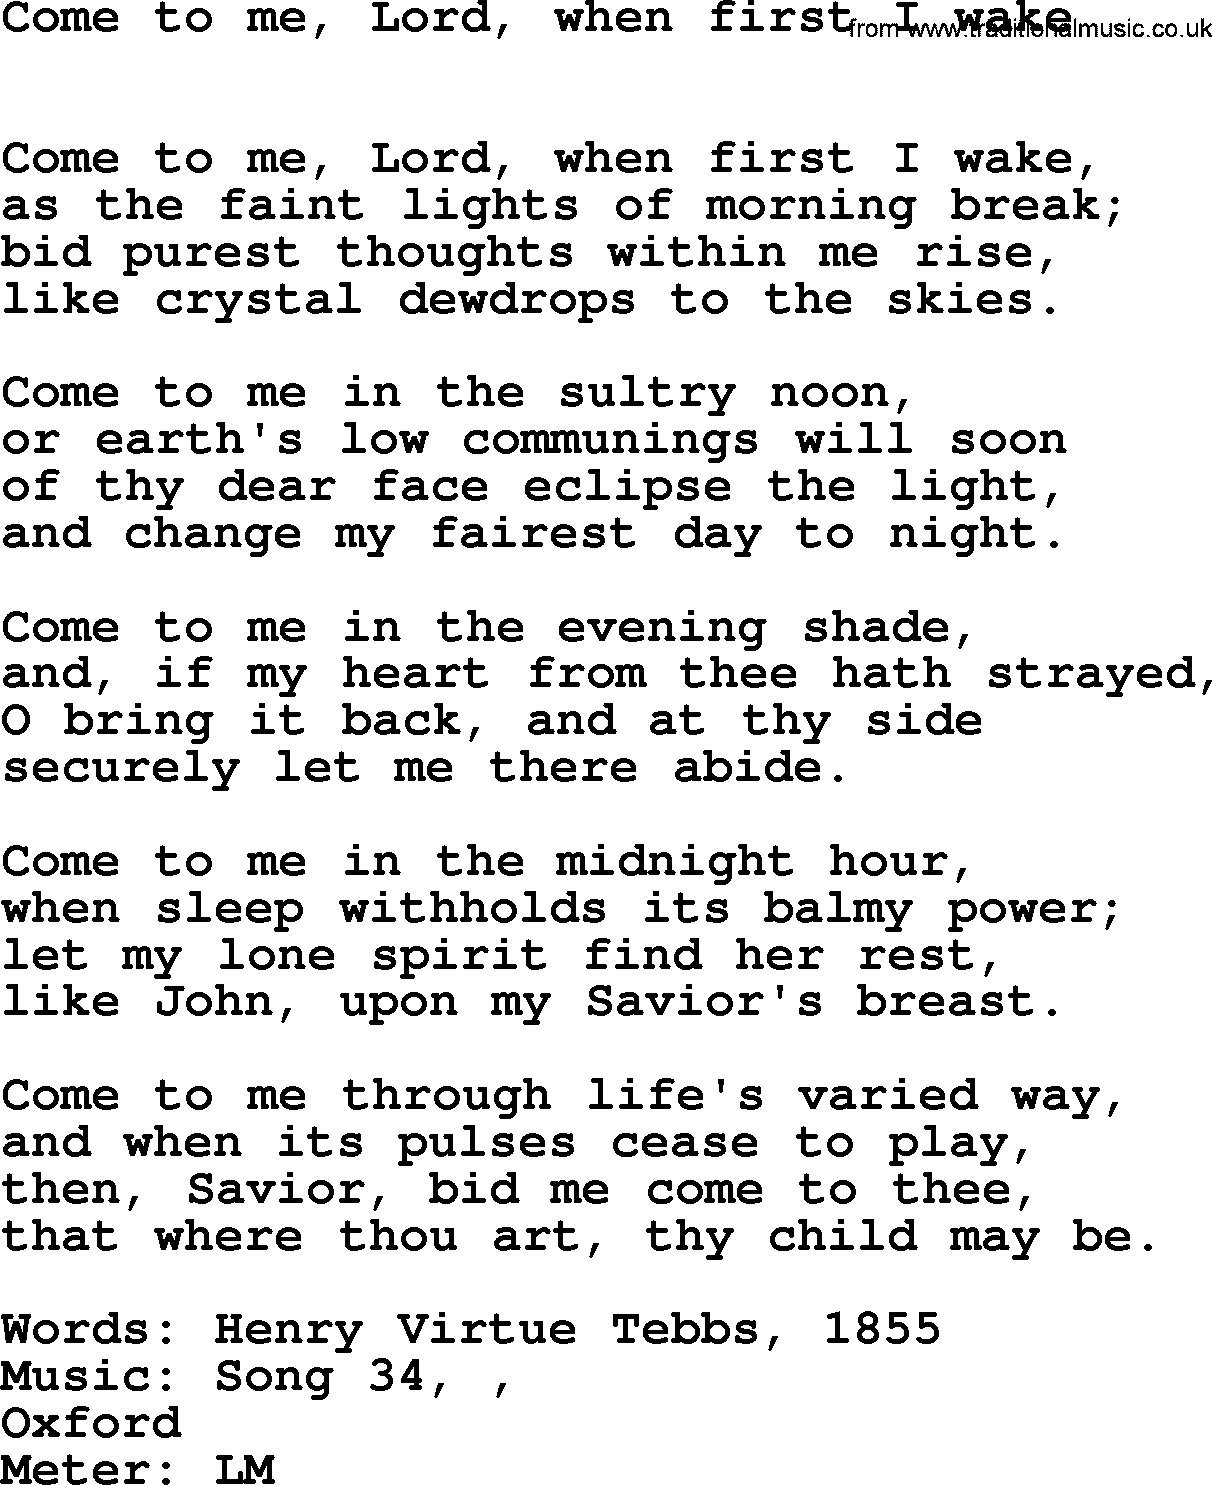 Book of Common Praise Hymn: Come To Me, Lord, When First I Wake.txt lyrics with midi music